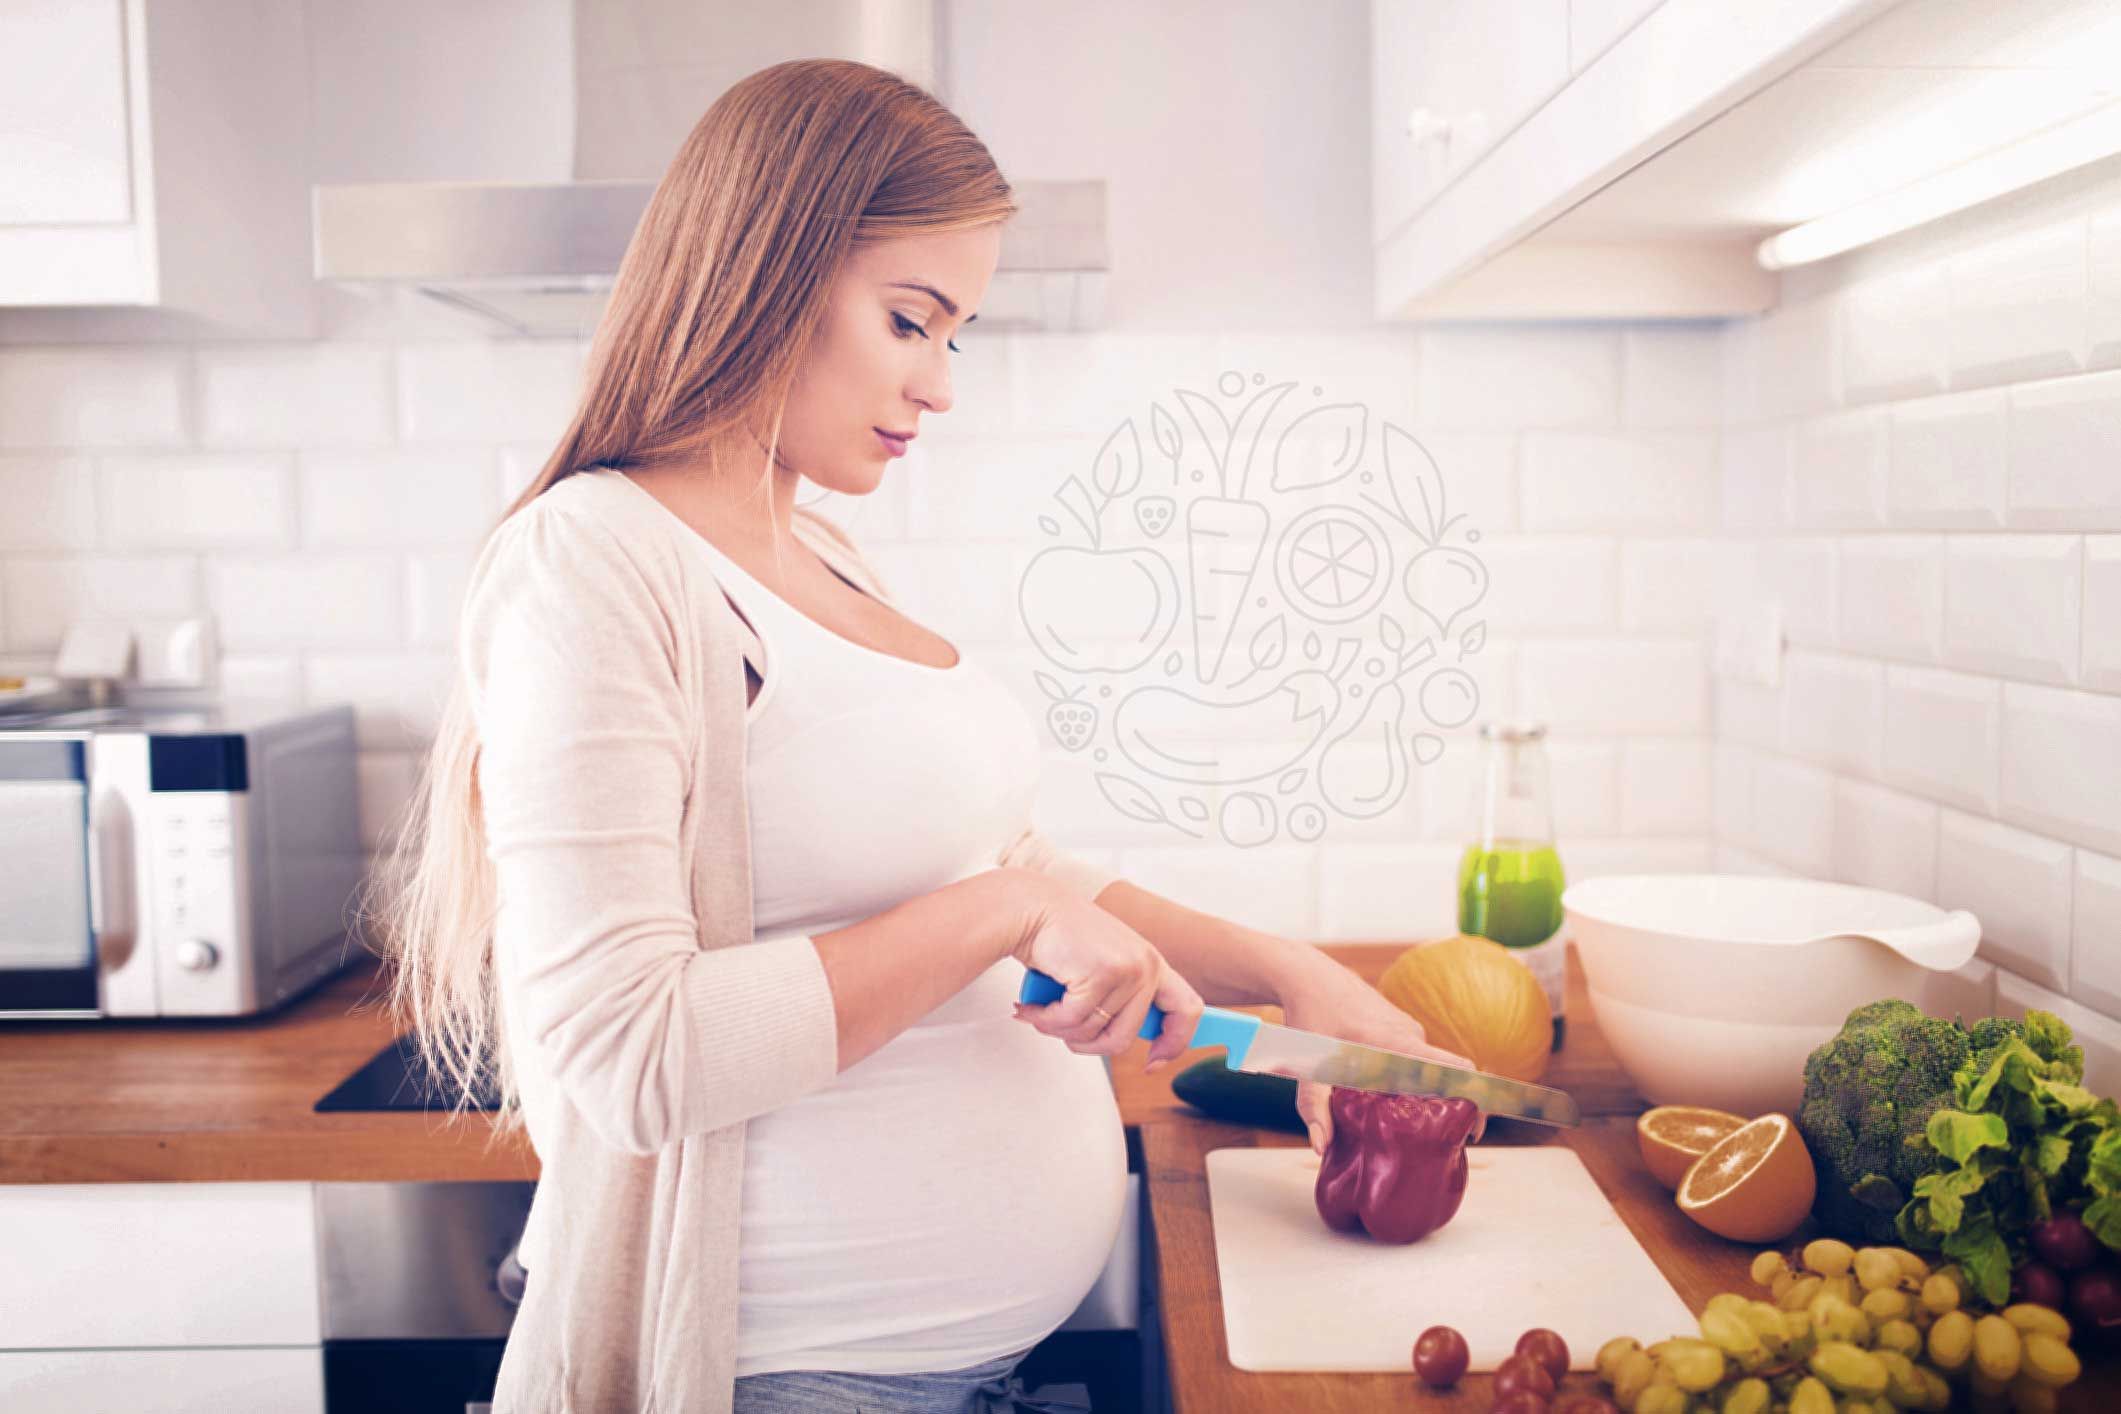 A few nutrients deserve special attention during pregnancy